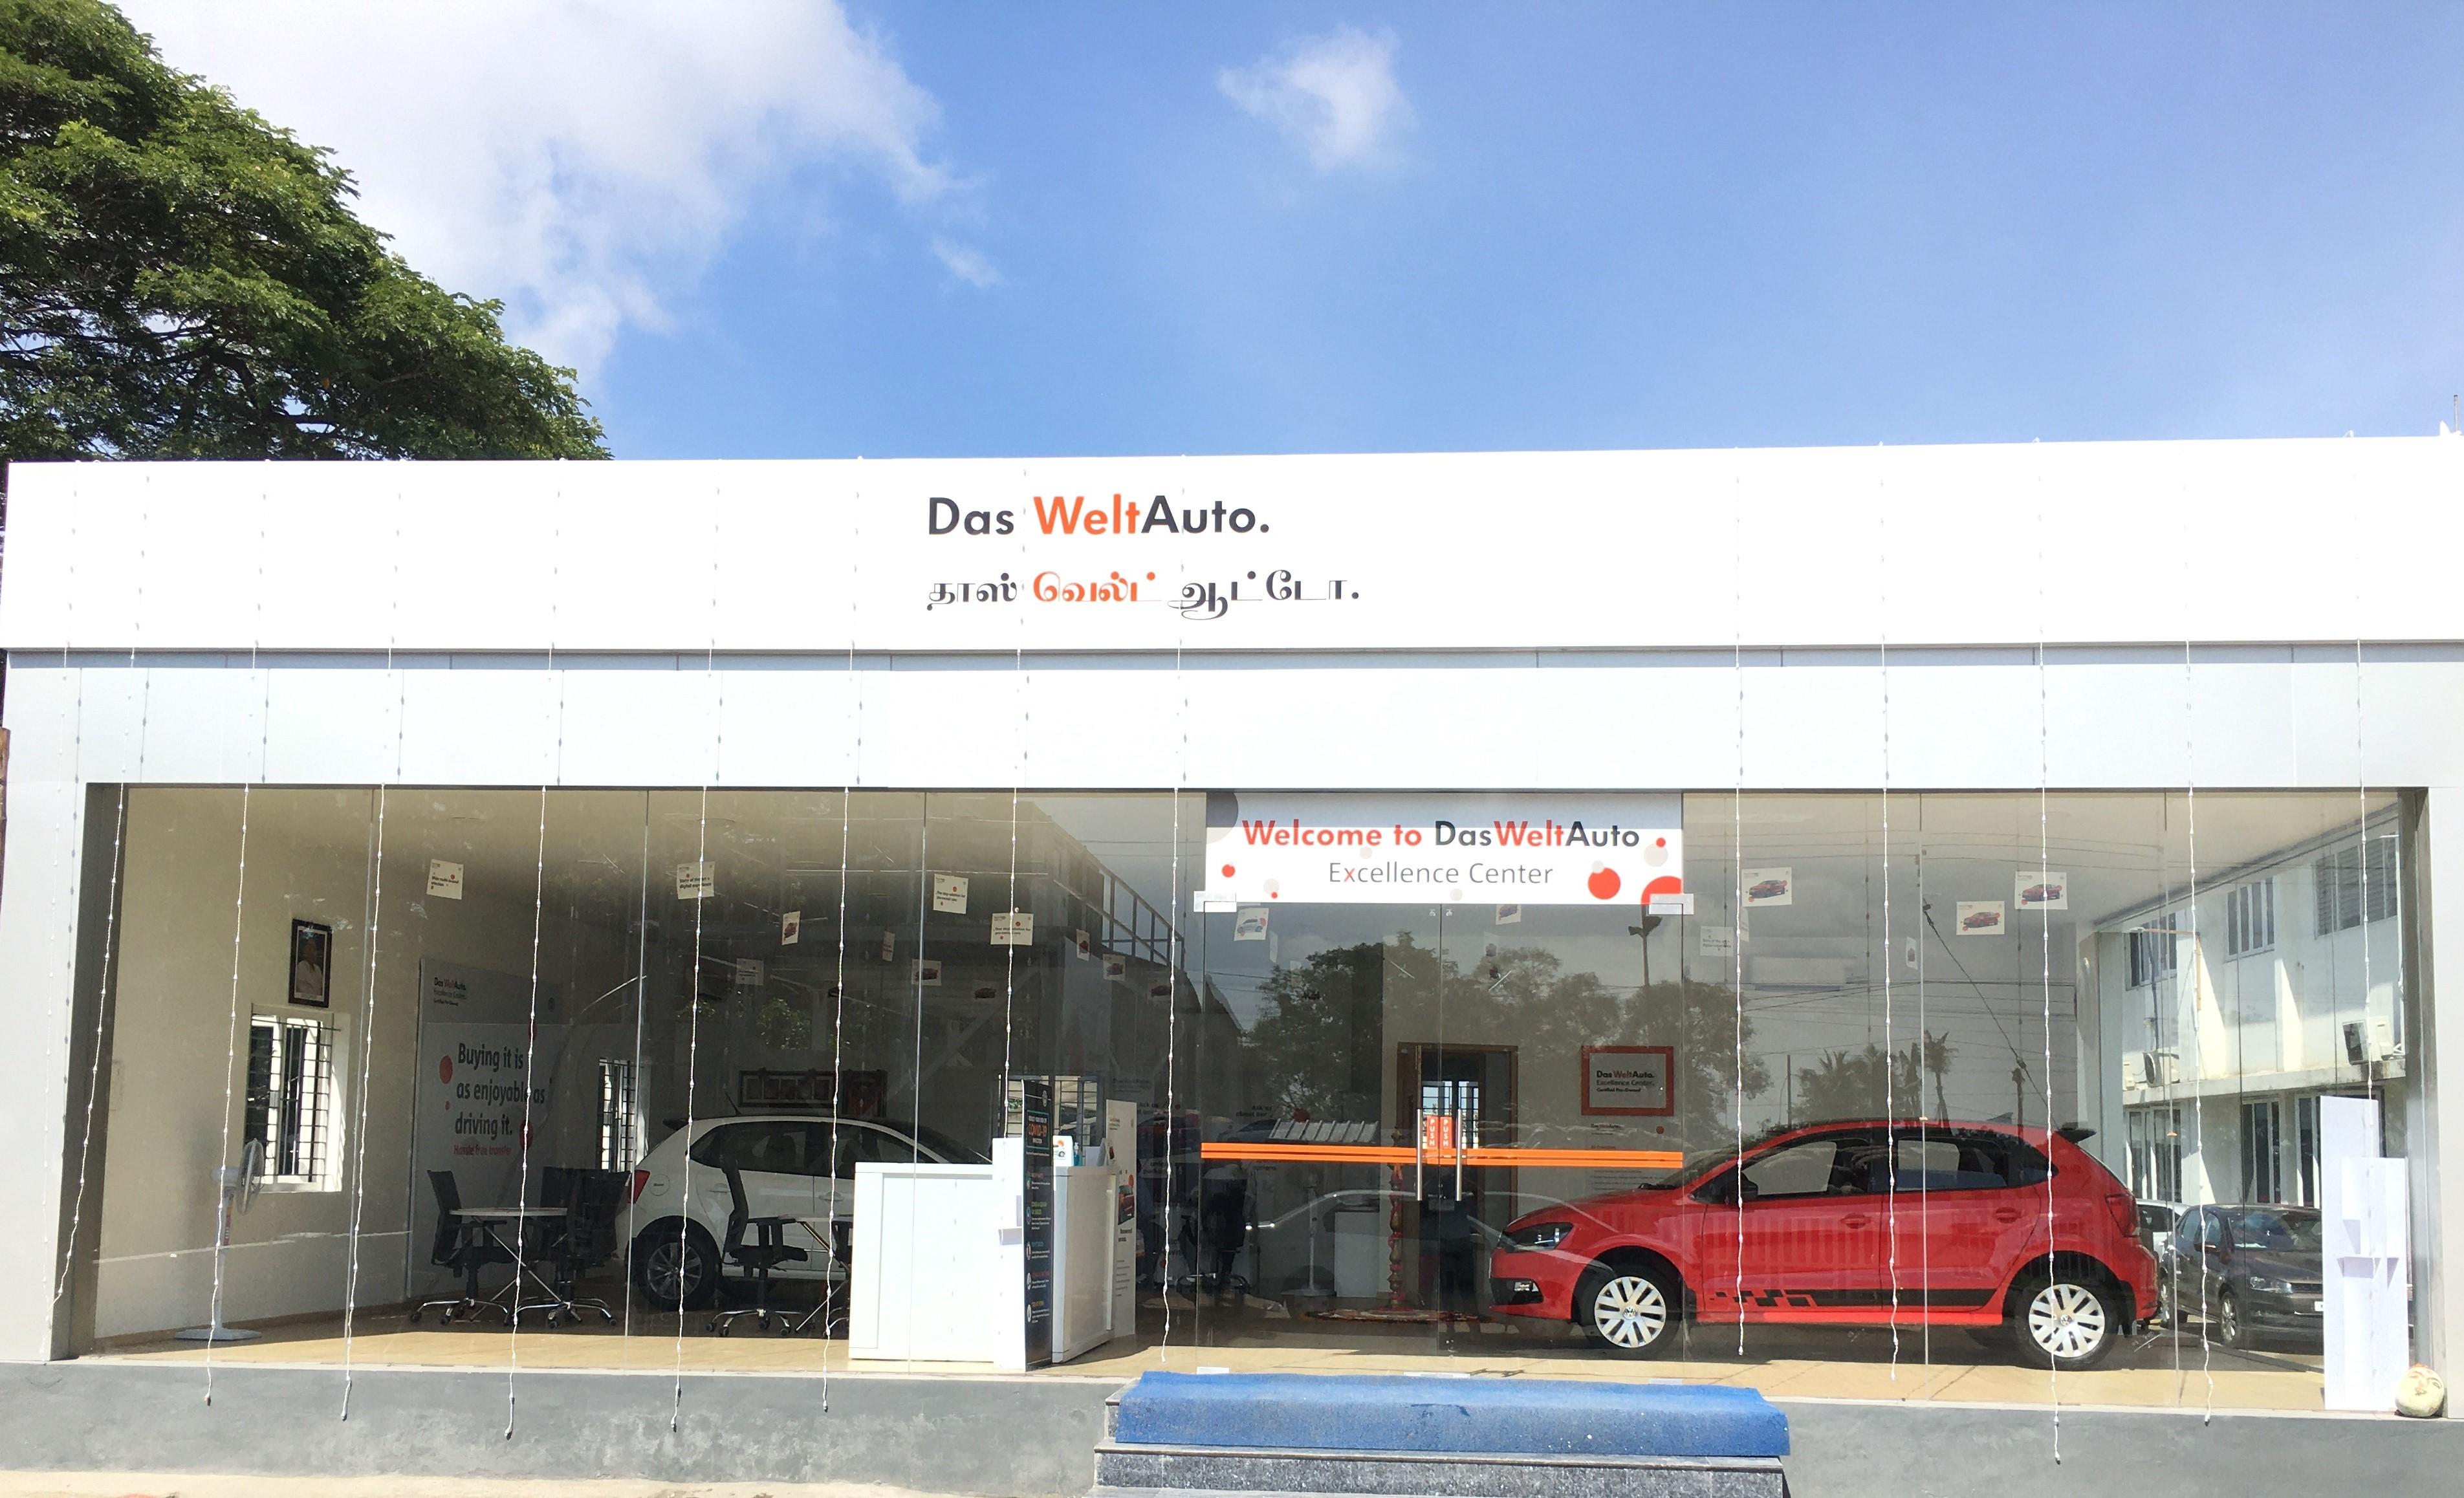 Volkswagen India Expects Twofold Growth In Used Car Business By 2025